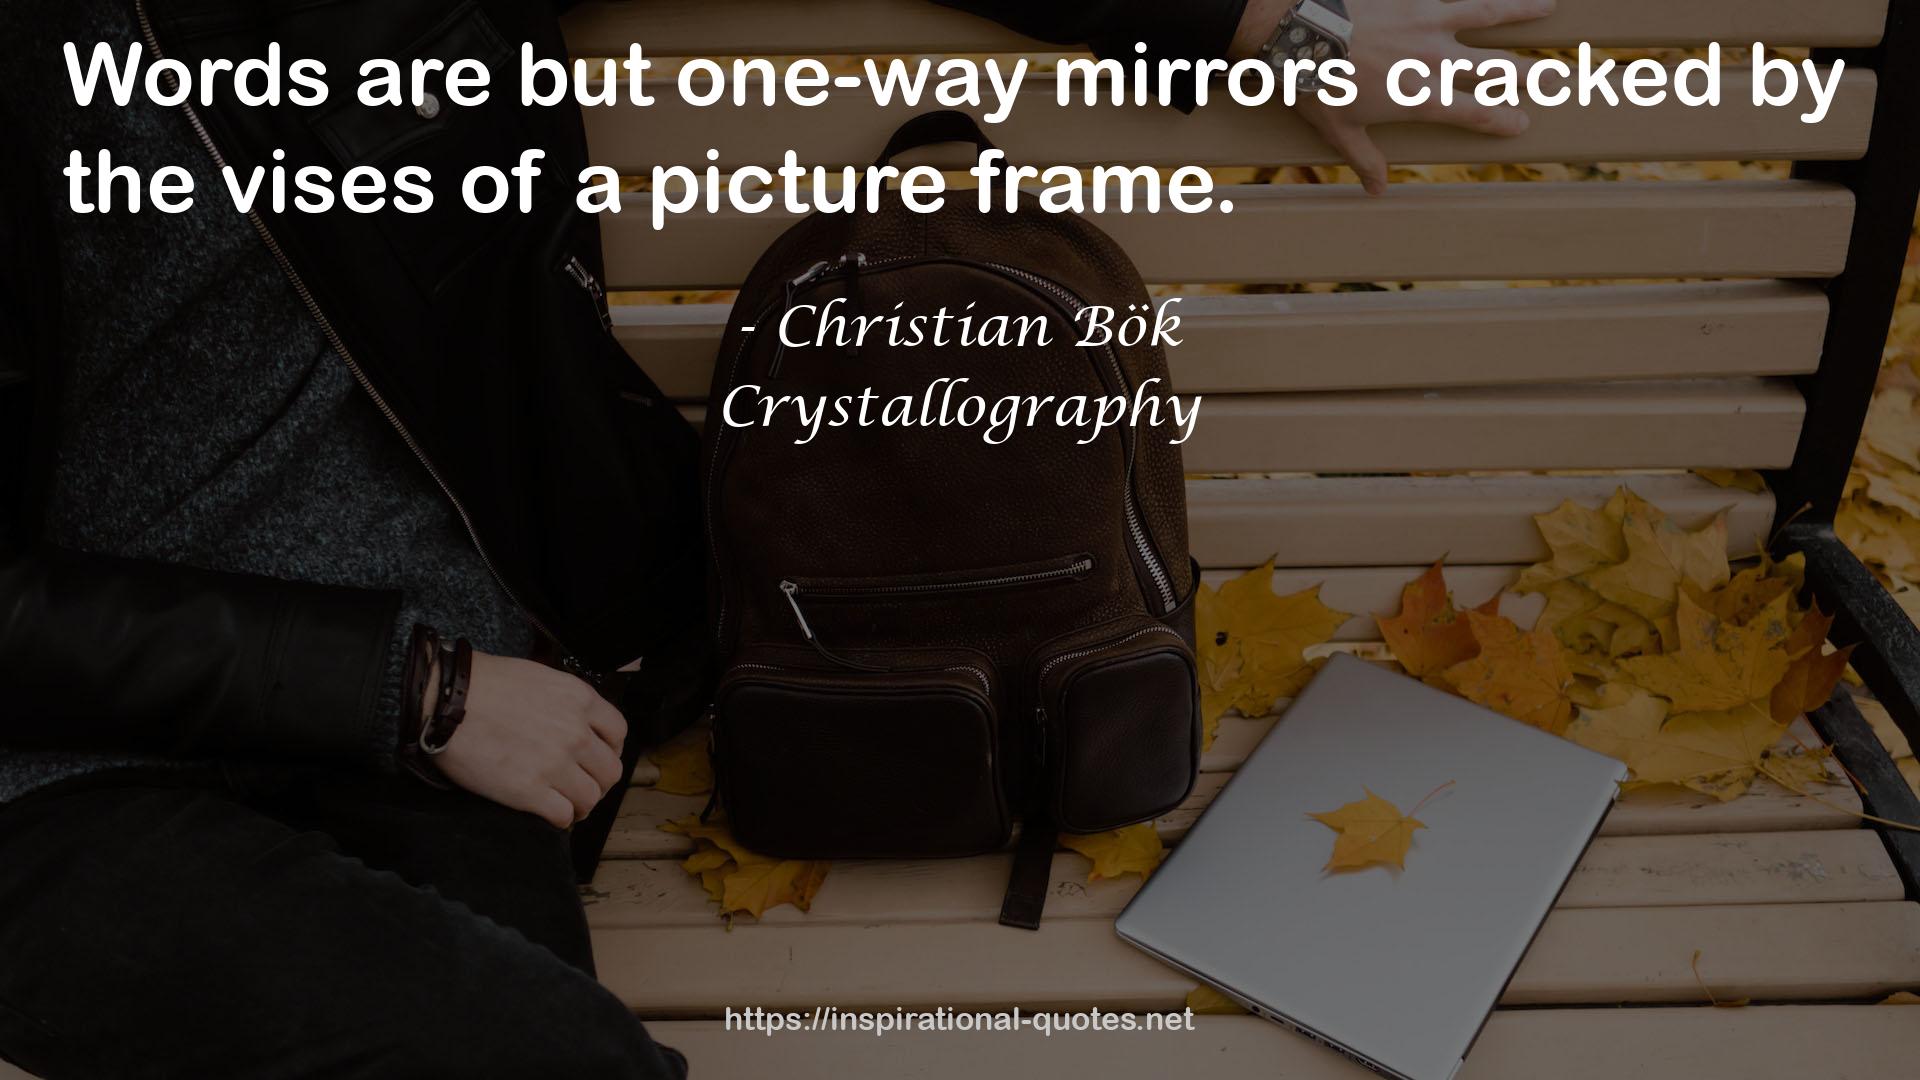 Crystallography QUOTES